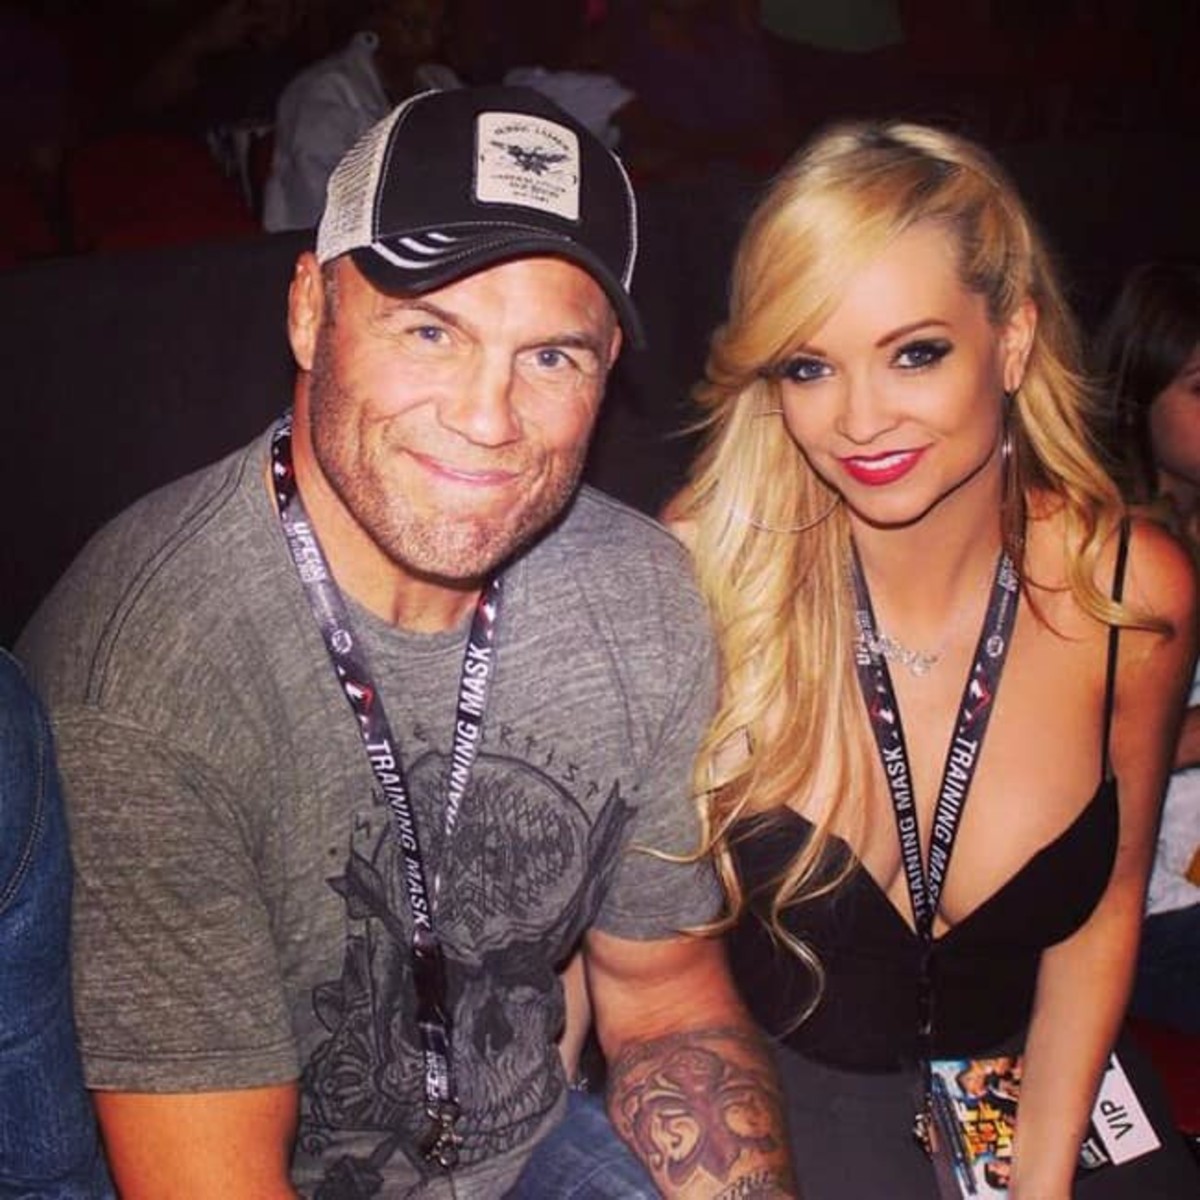 Mindy Robinson— the girlfriend of Randy Couture